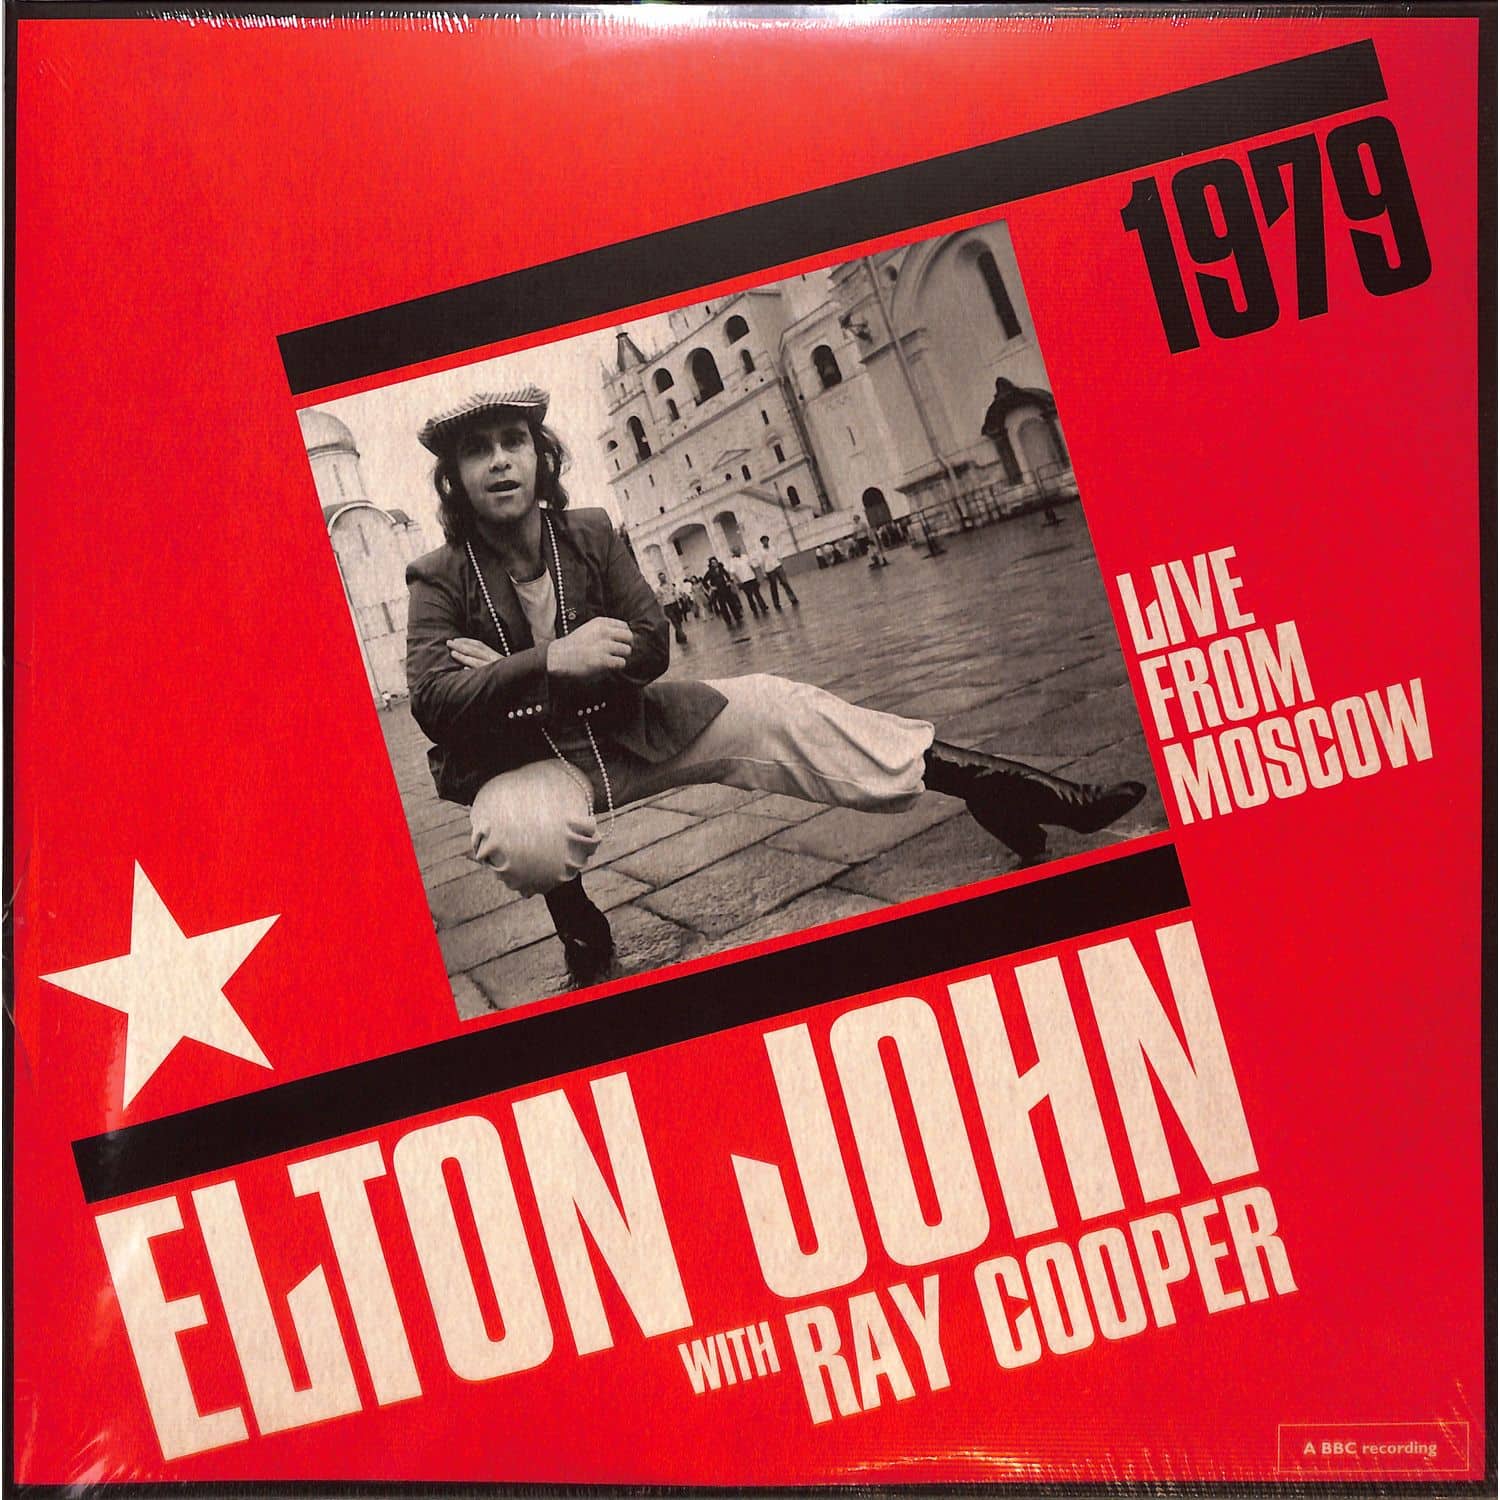 Elton John & Ray Cooper - LIVE FROM MOSCOW 